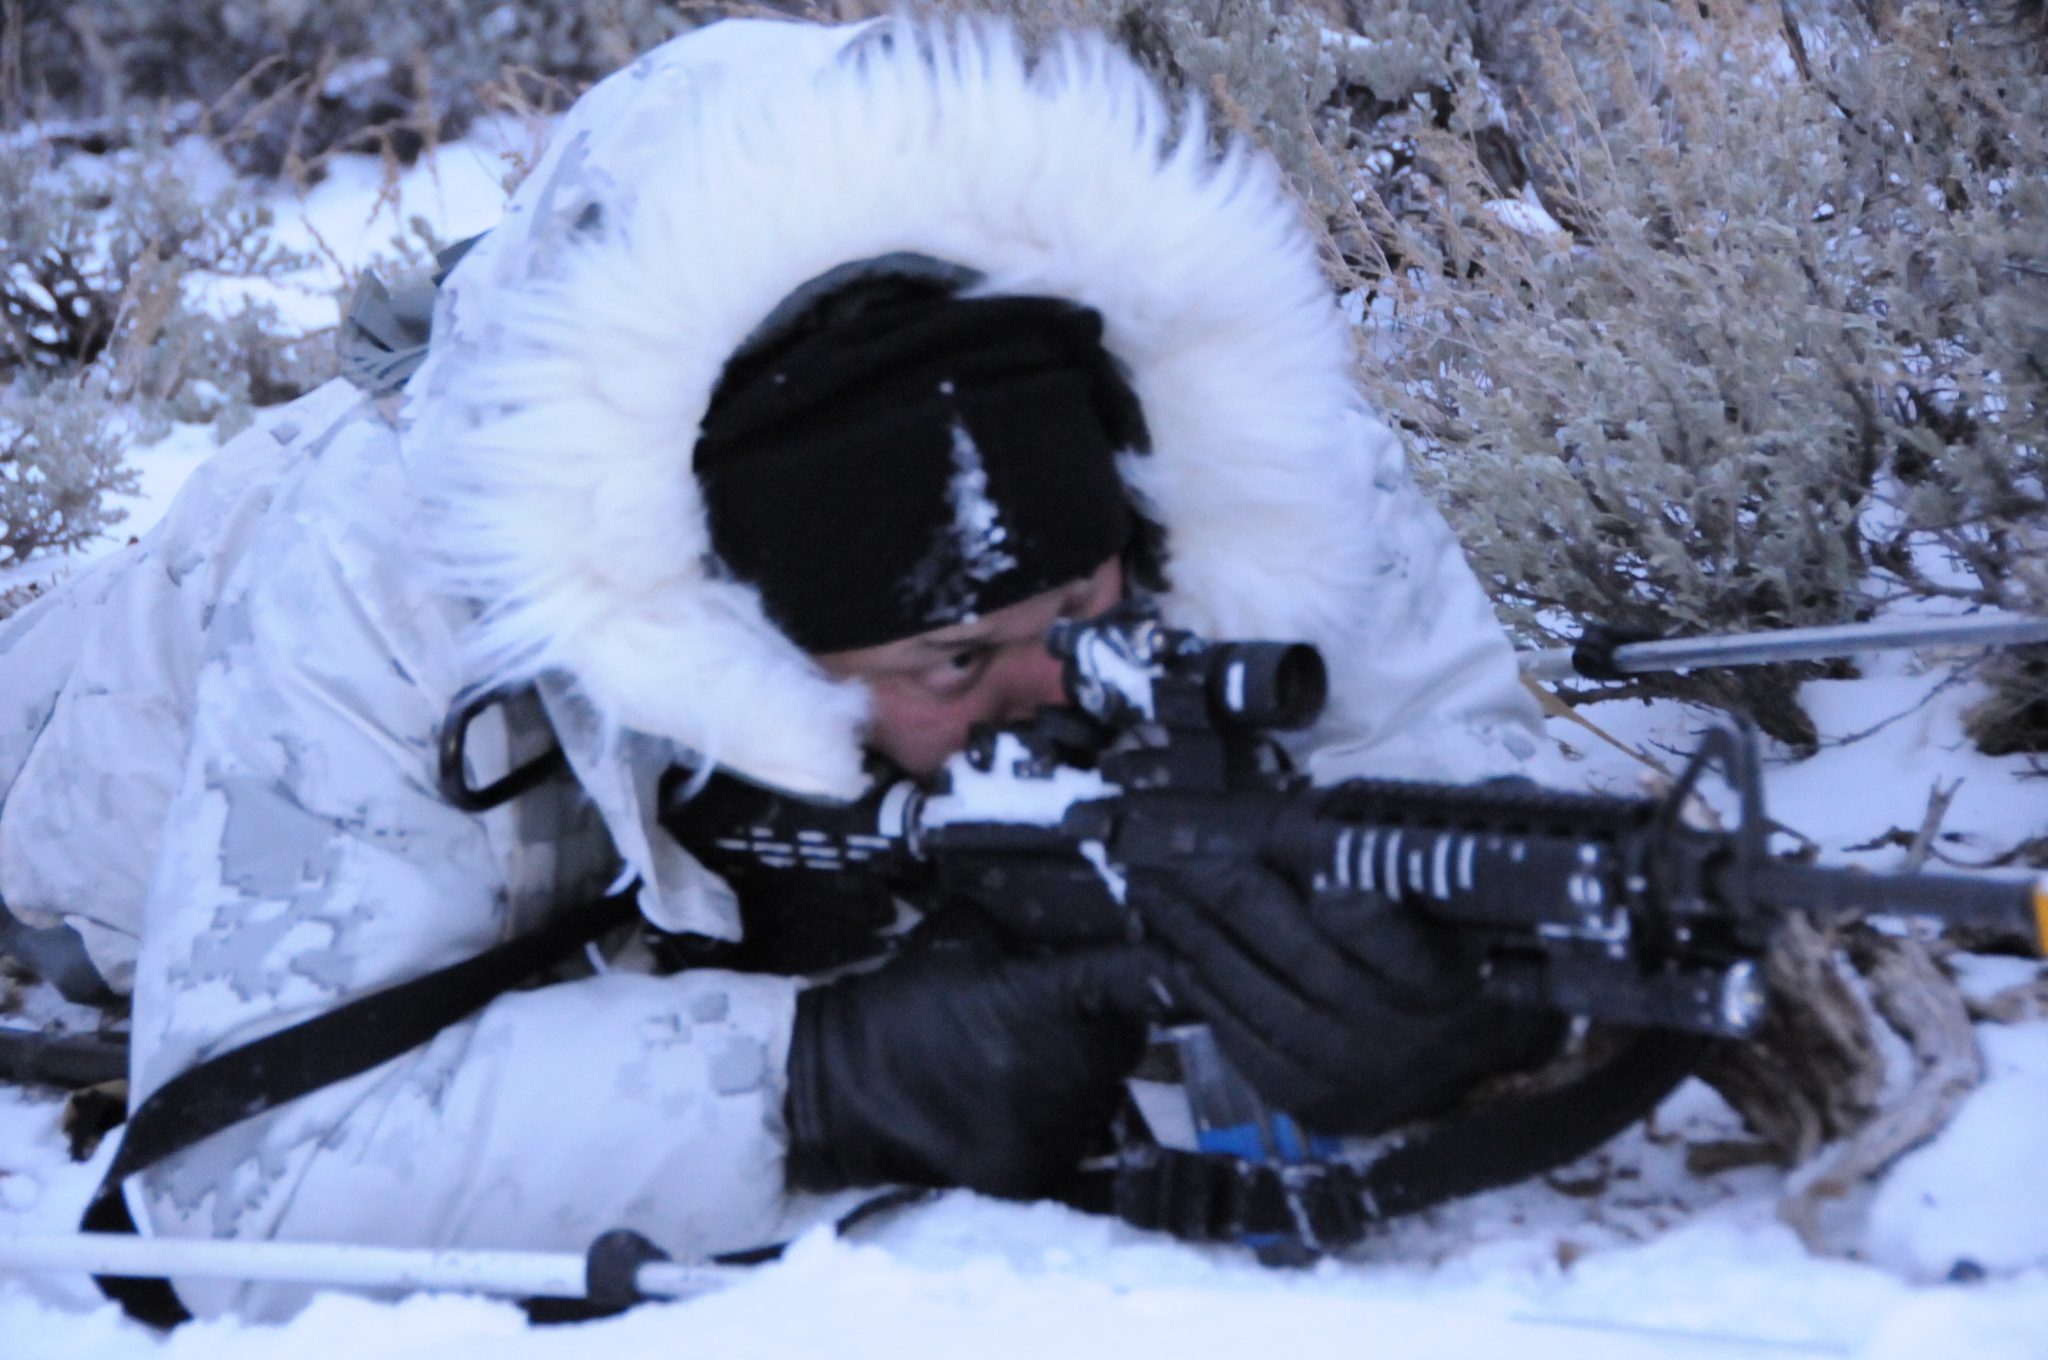 Operation Red Snow tests cold weather training and multi-agency tactics